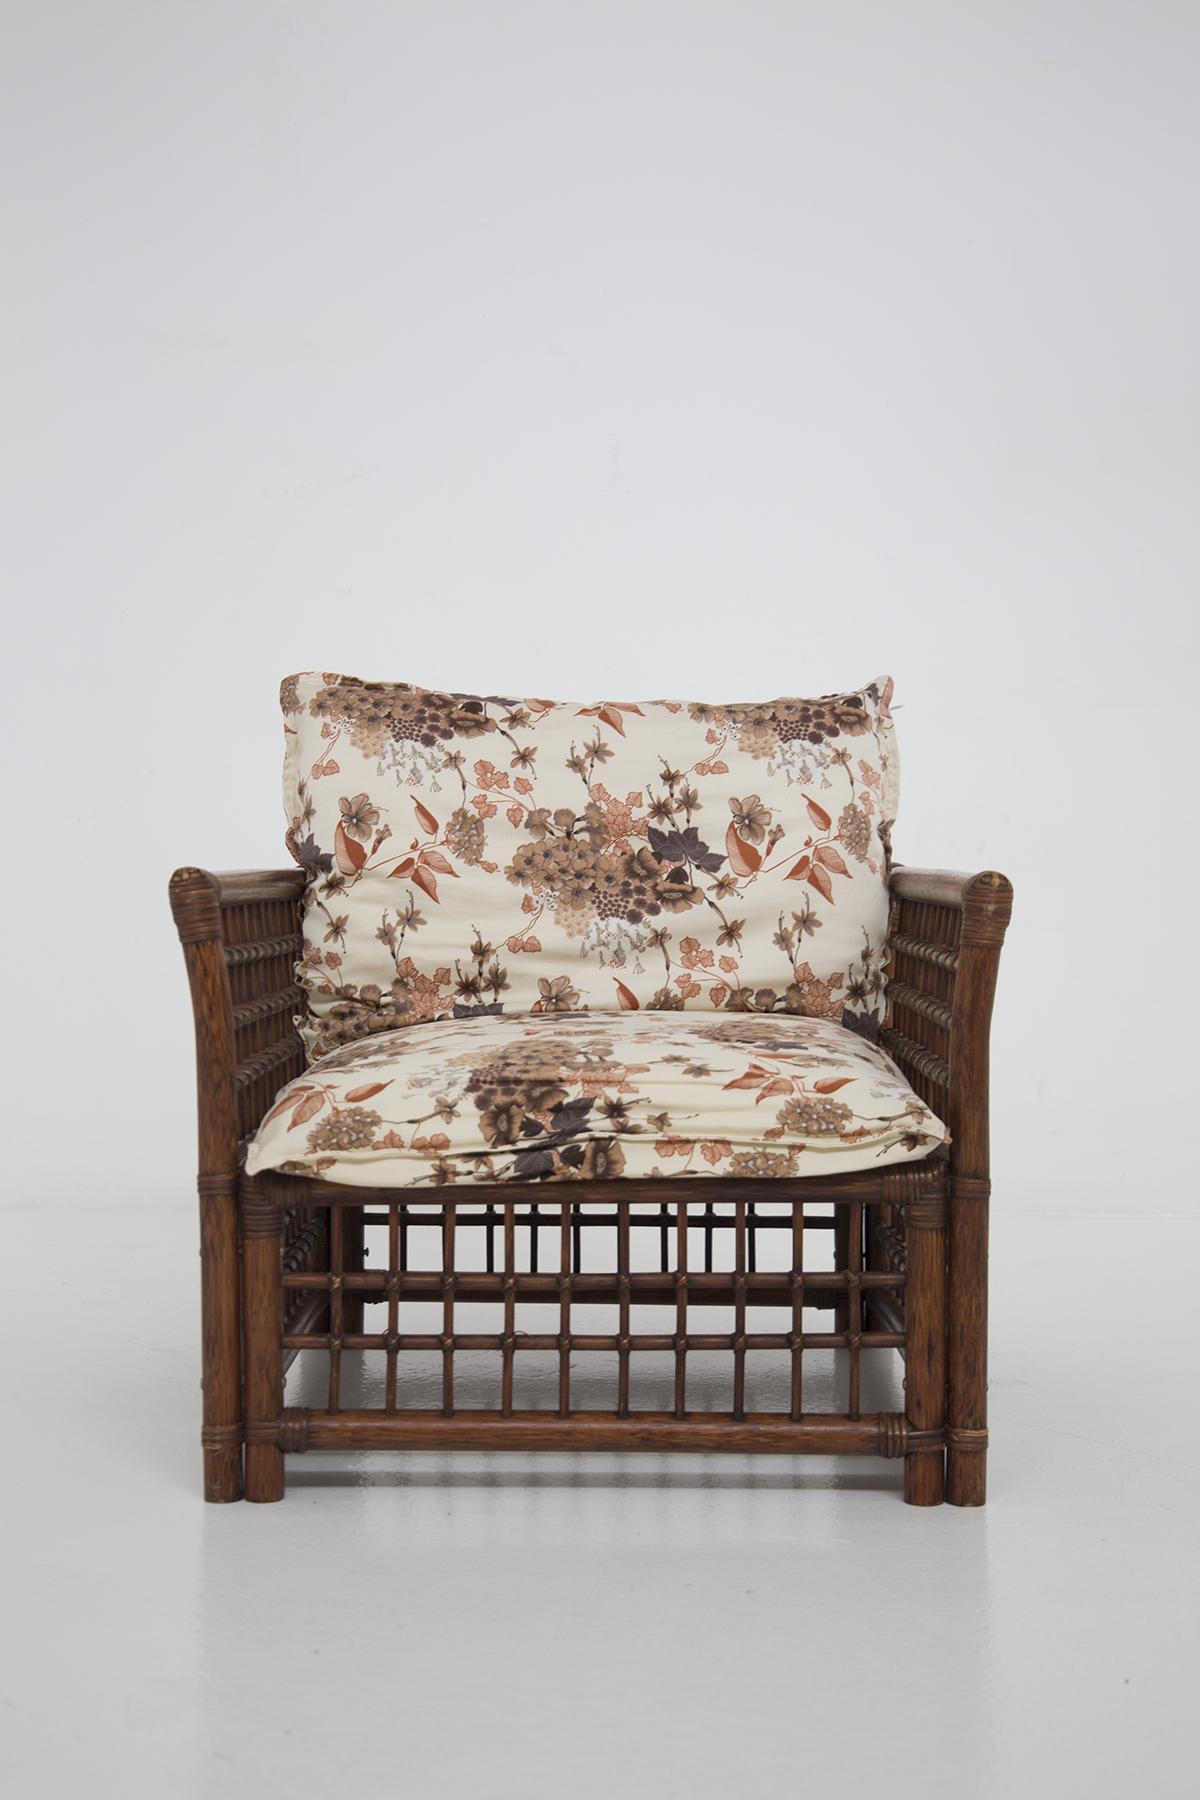 Mid-20th Century Vivai del Sud Vintage Wood and Rattan Armchairs W Floral Fabric